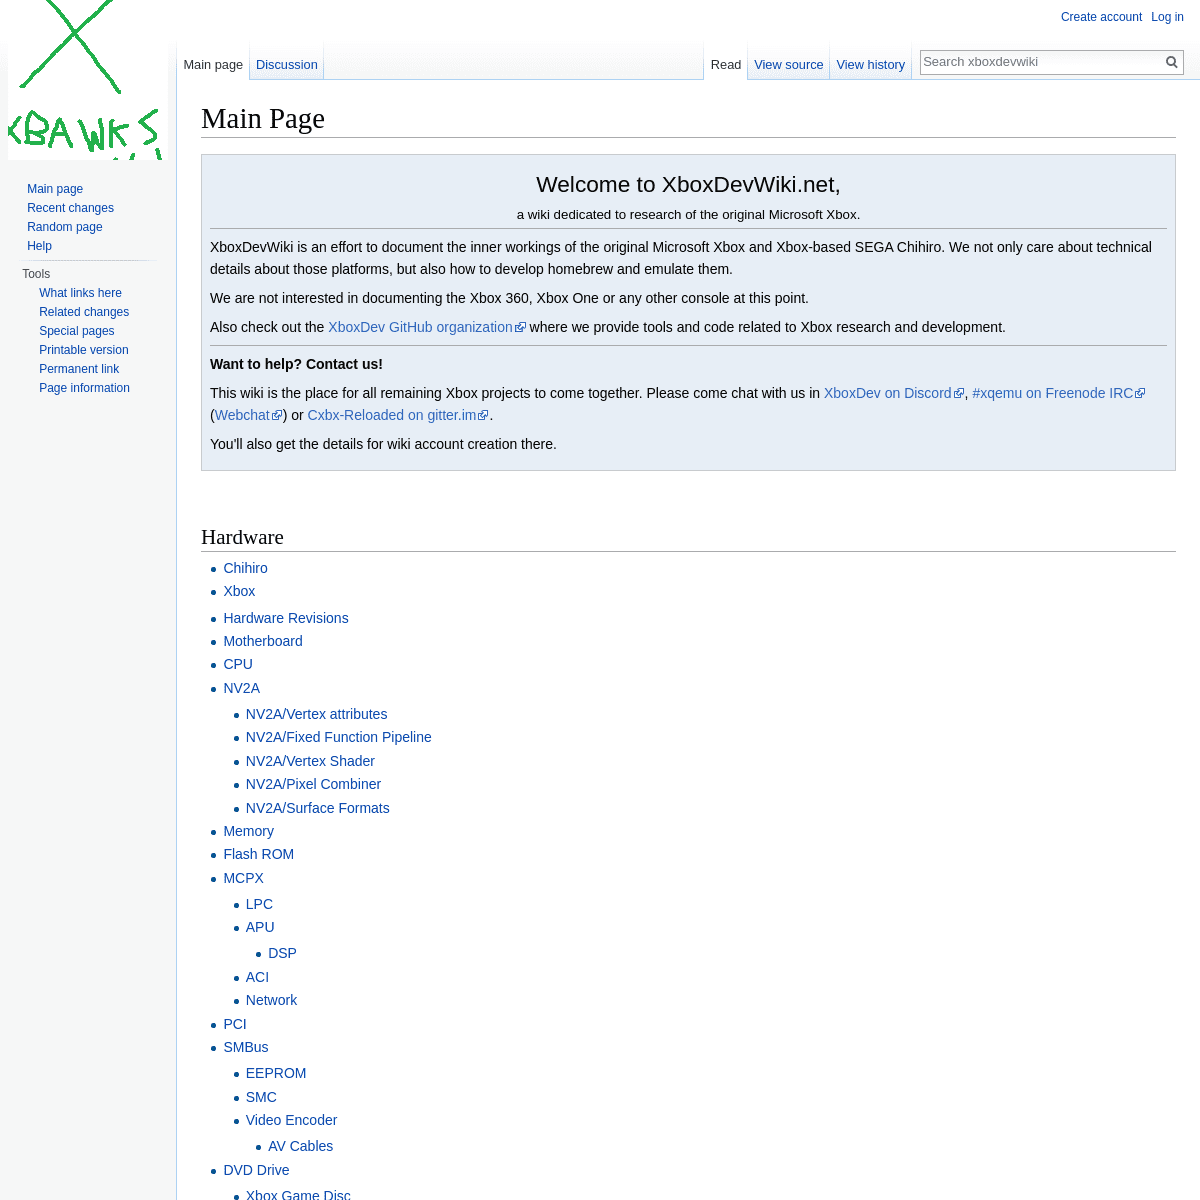 A complete backup of xboxdevwiki.net